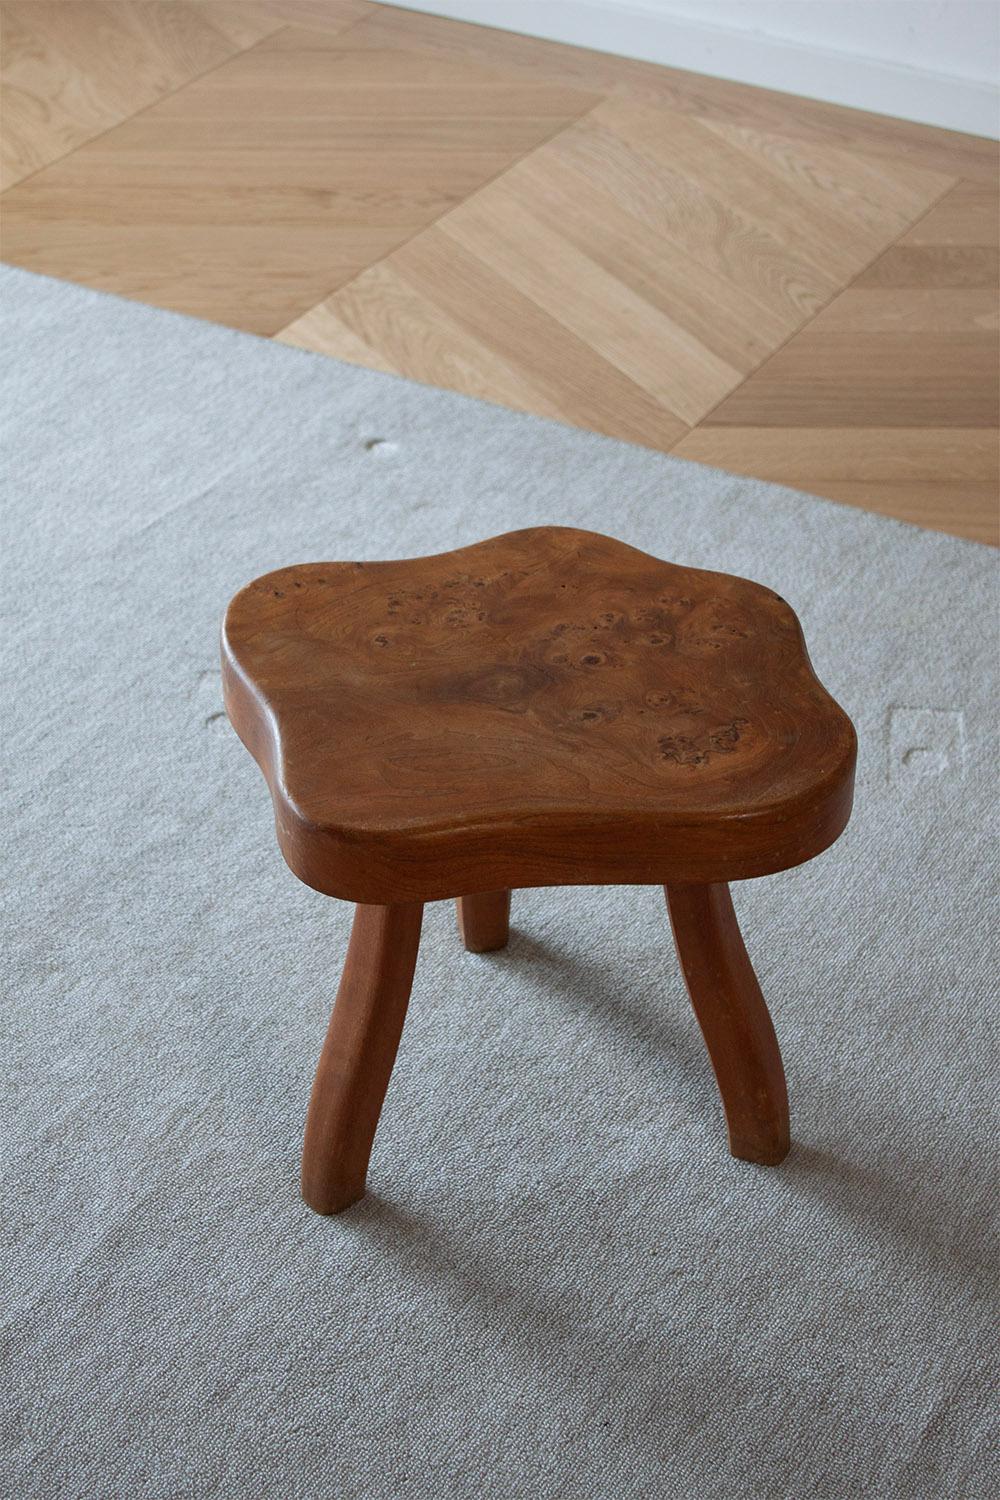 Primitive French hand carved Burl wood Three Legged Stool (1 of 4) For Sale